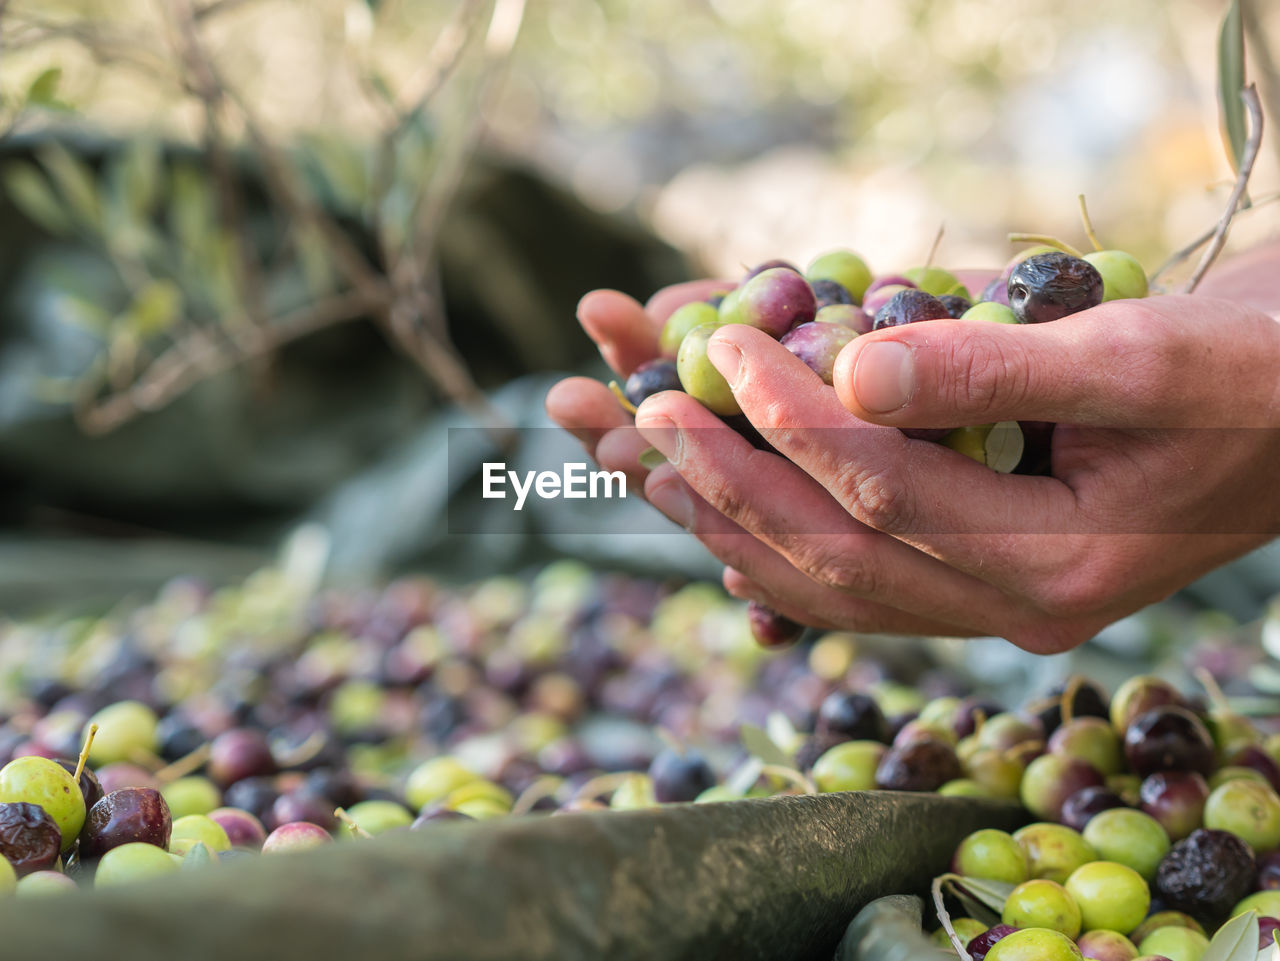 Cropped hands of man holding olives over tarpaulin